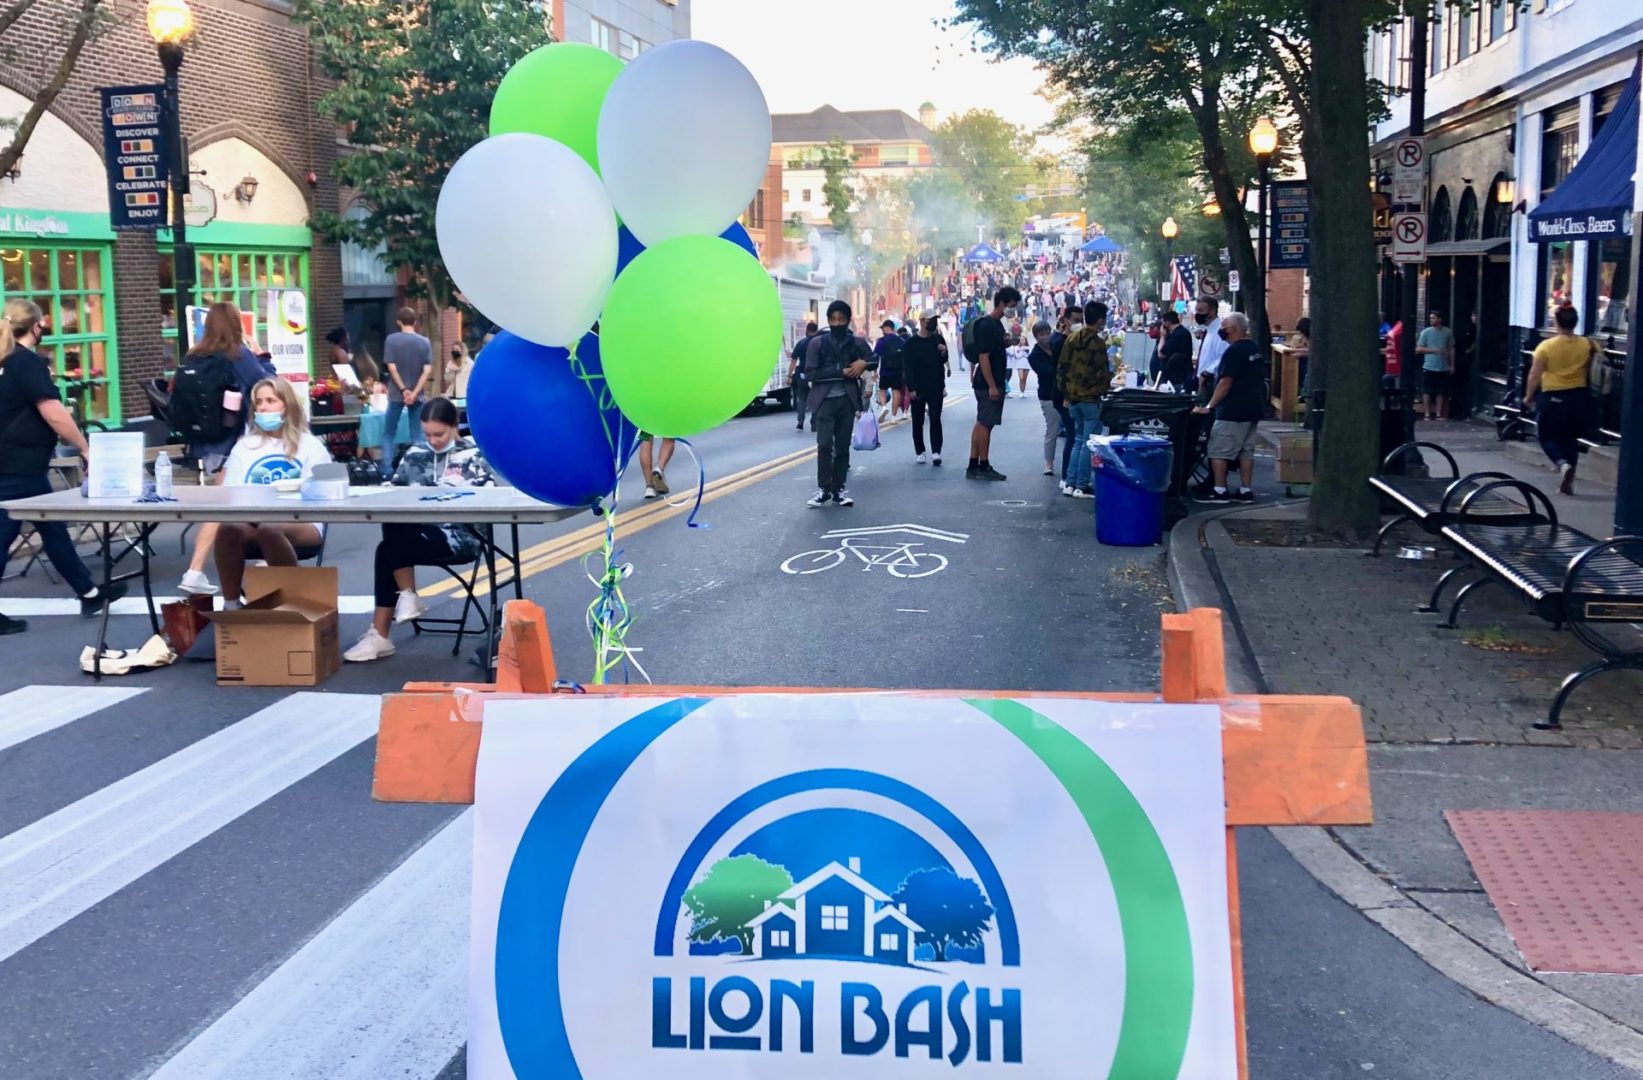 LION Bash Aims to Bring State College Community Together State